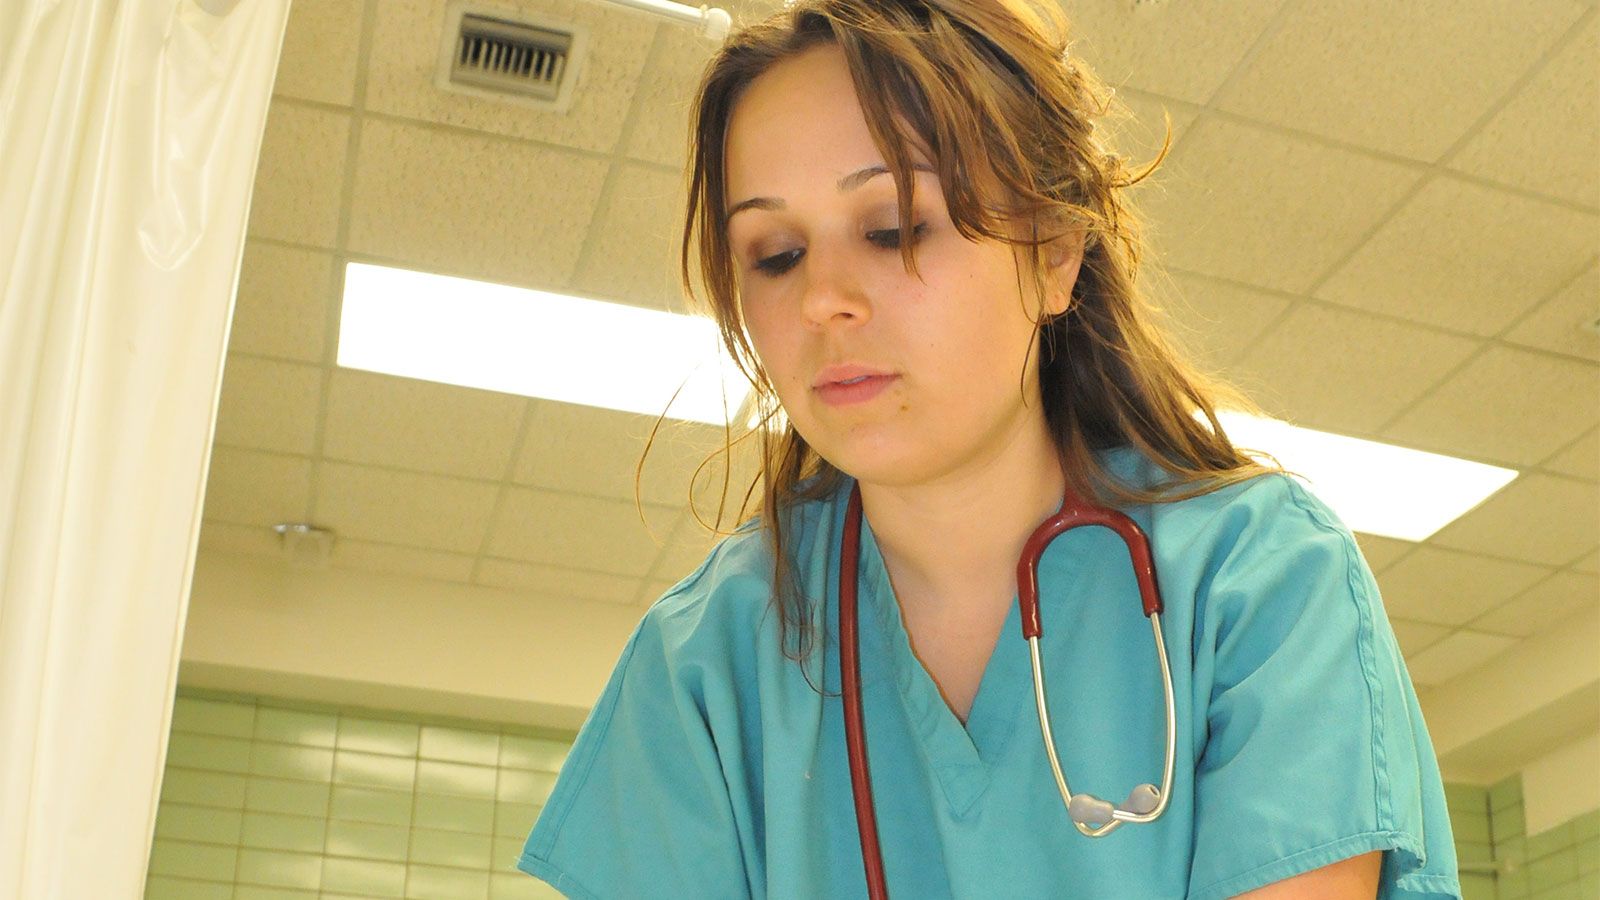 hunter nursing student wearing scrubs and stethoscope in lab